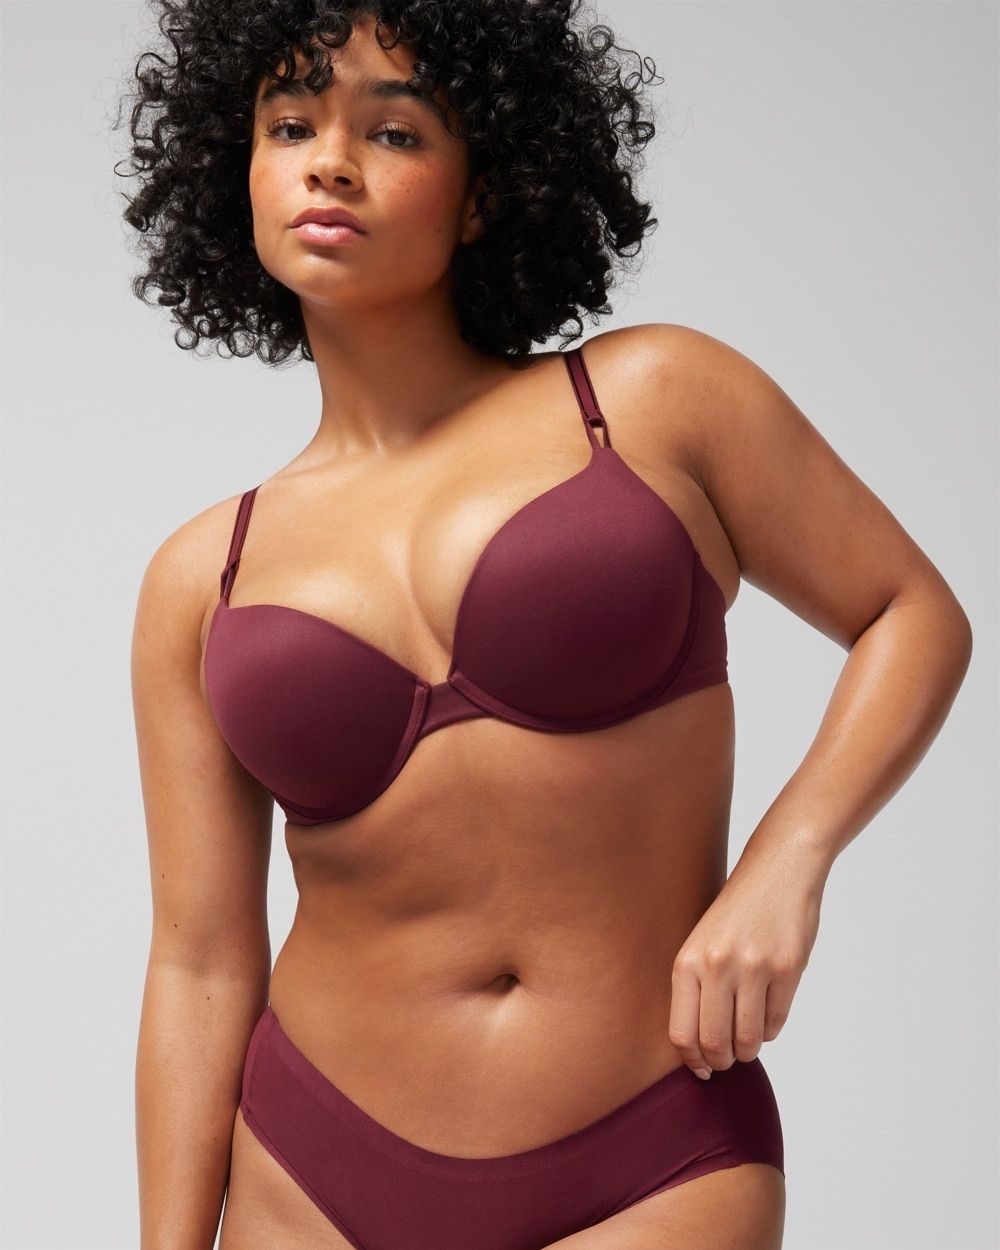 The big bra sale at SOMA is happening now. Bras are just $29